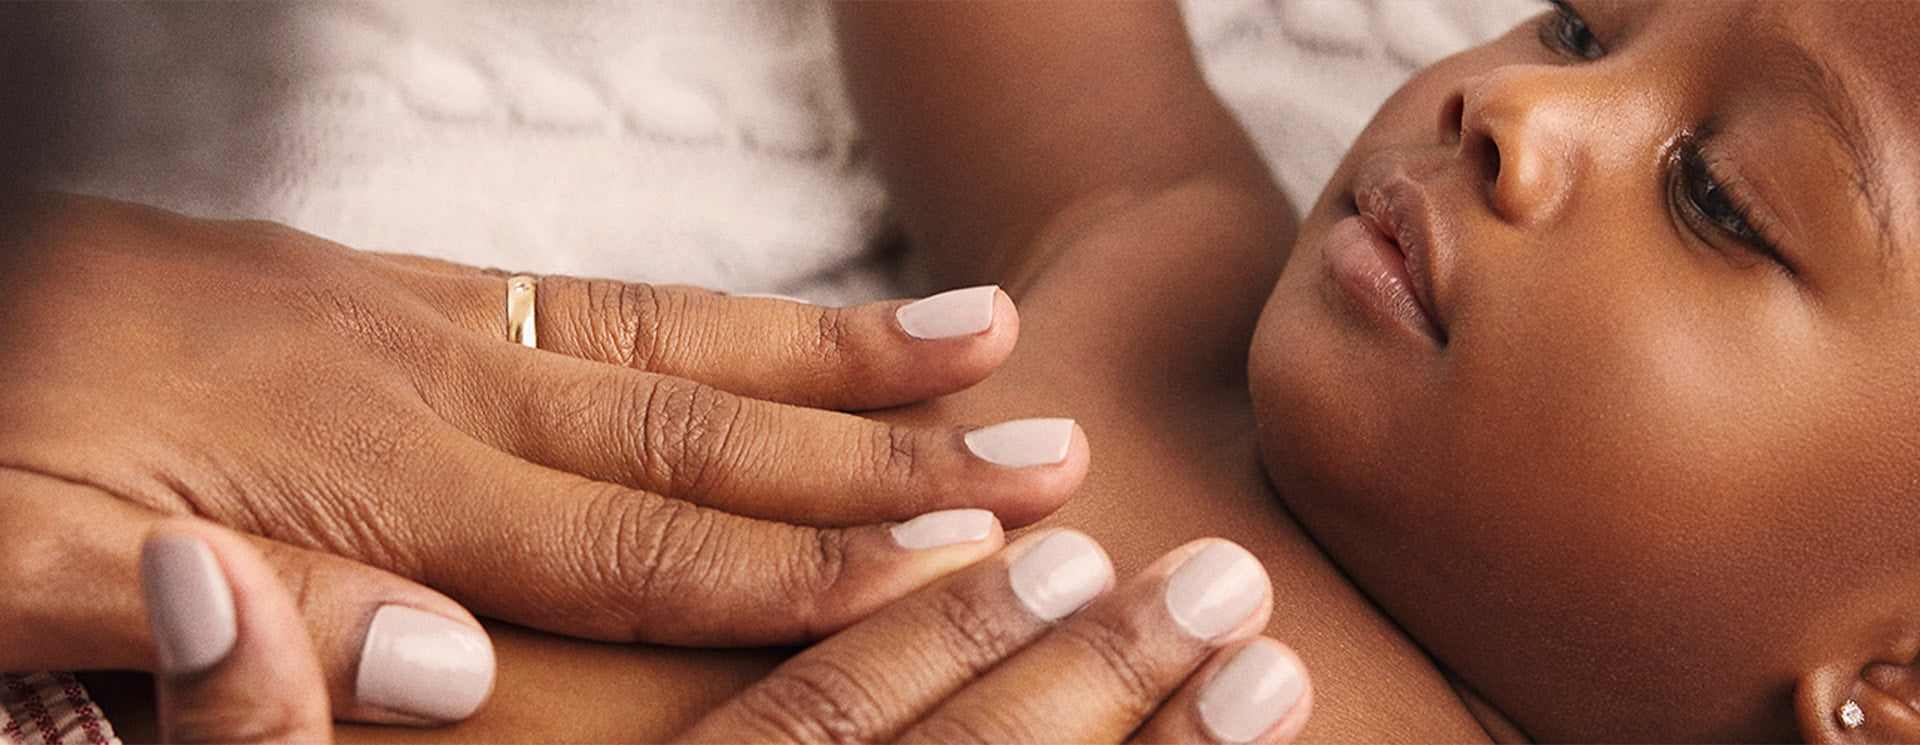 Massaging strengthens the bond between you and your baby